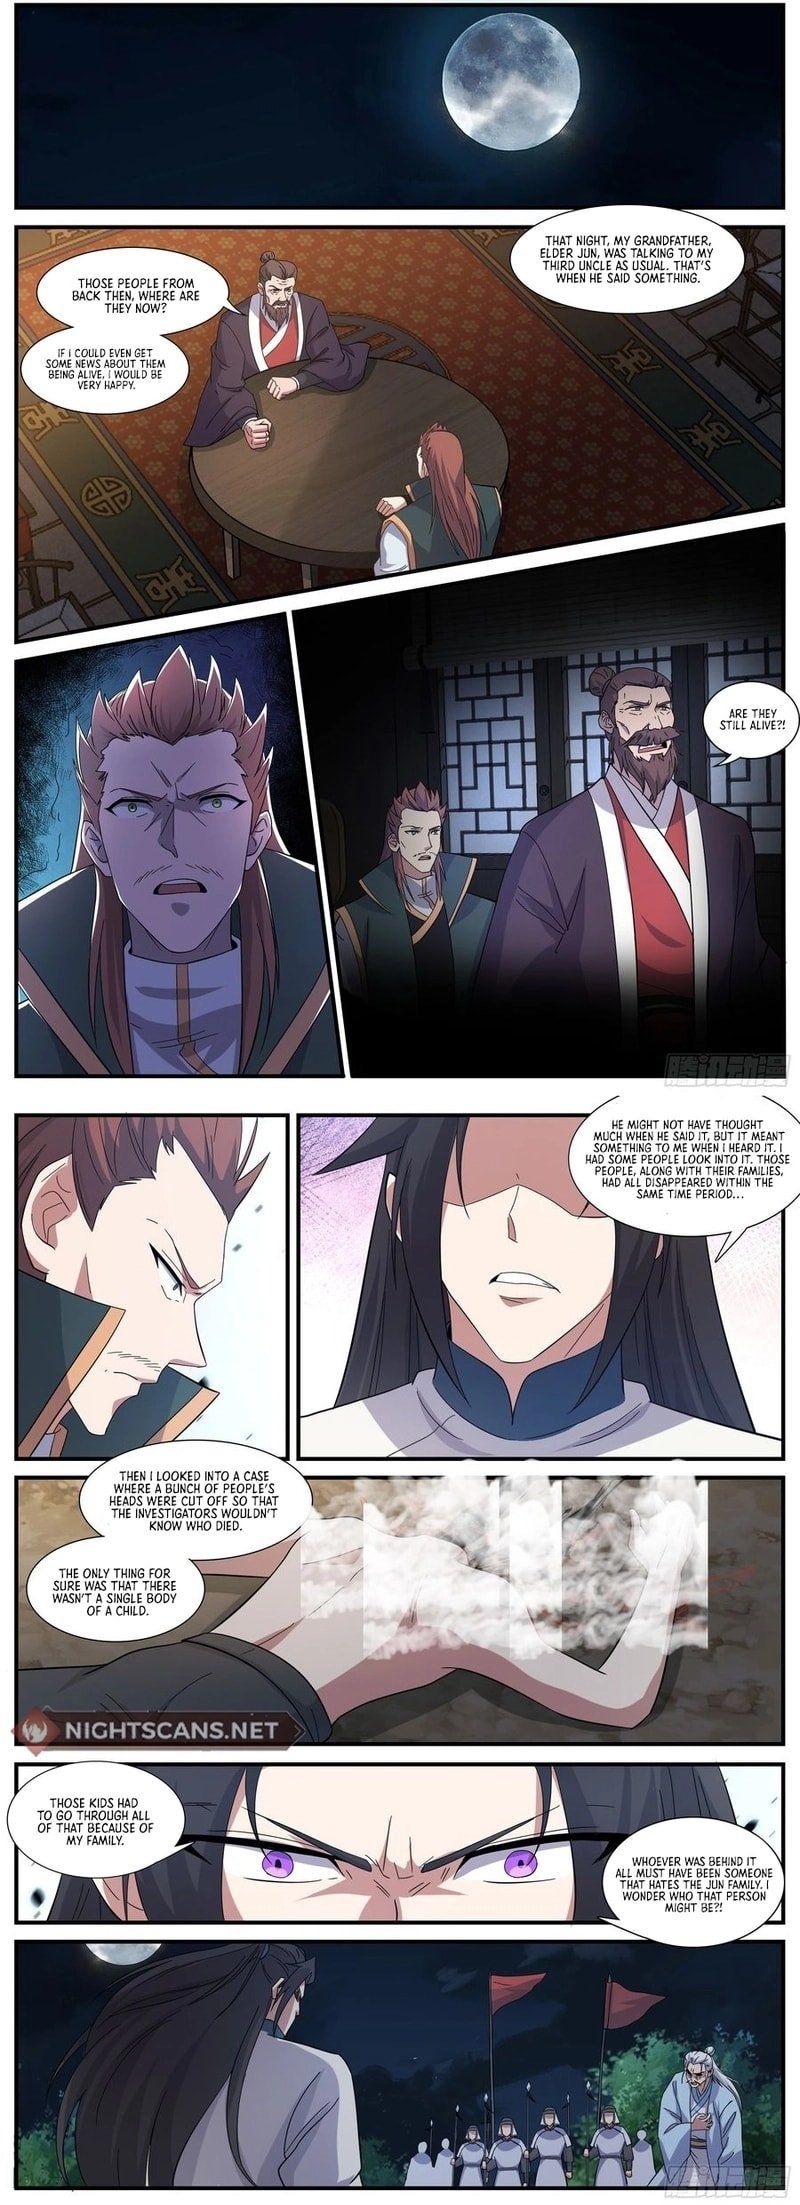 Otherworldly Evil Monarch Chapter 244 page 7